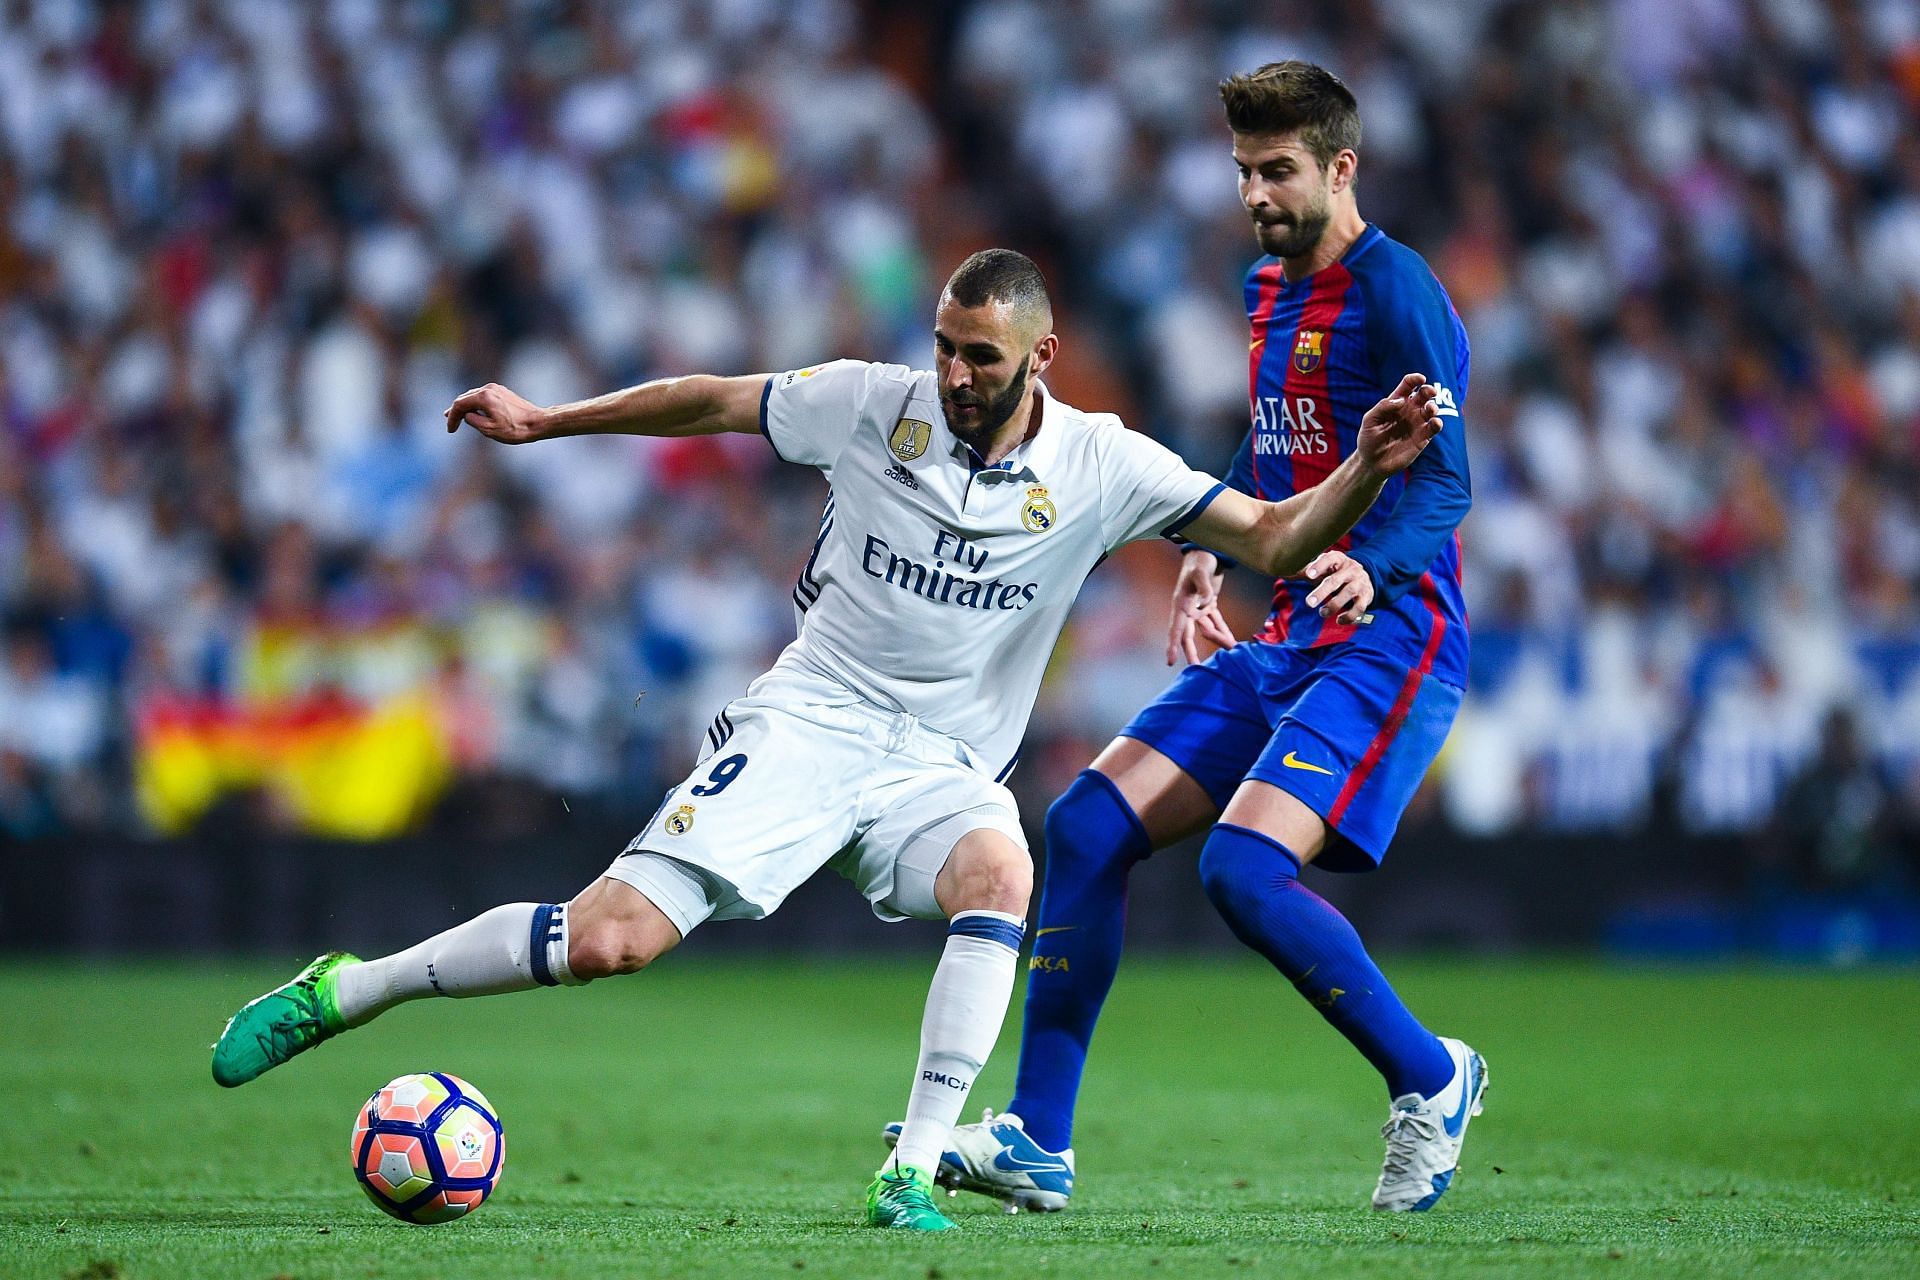 Real Madrid take on Barcelona this weekend